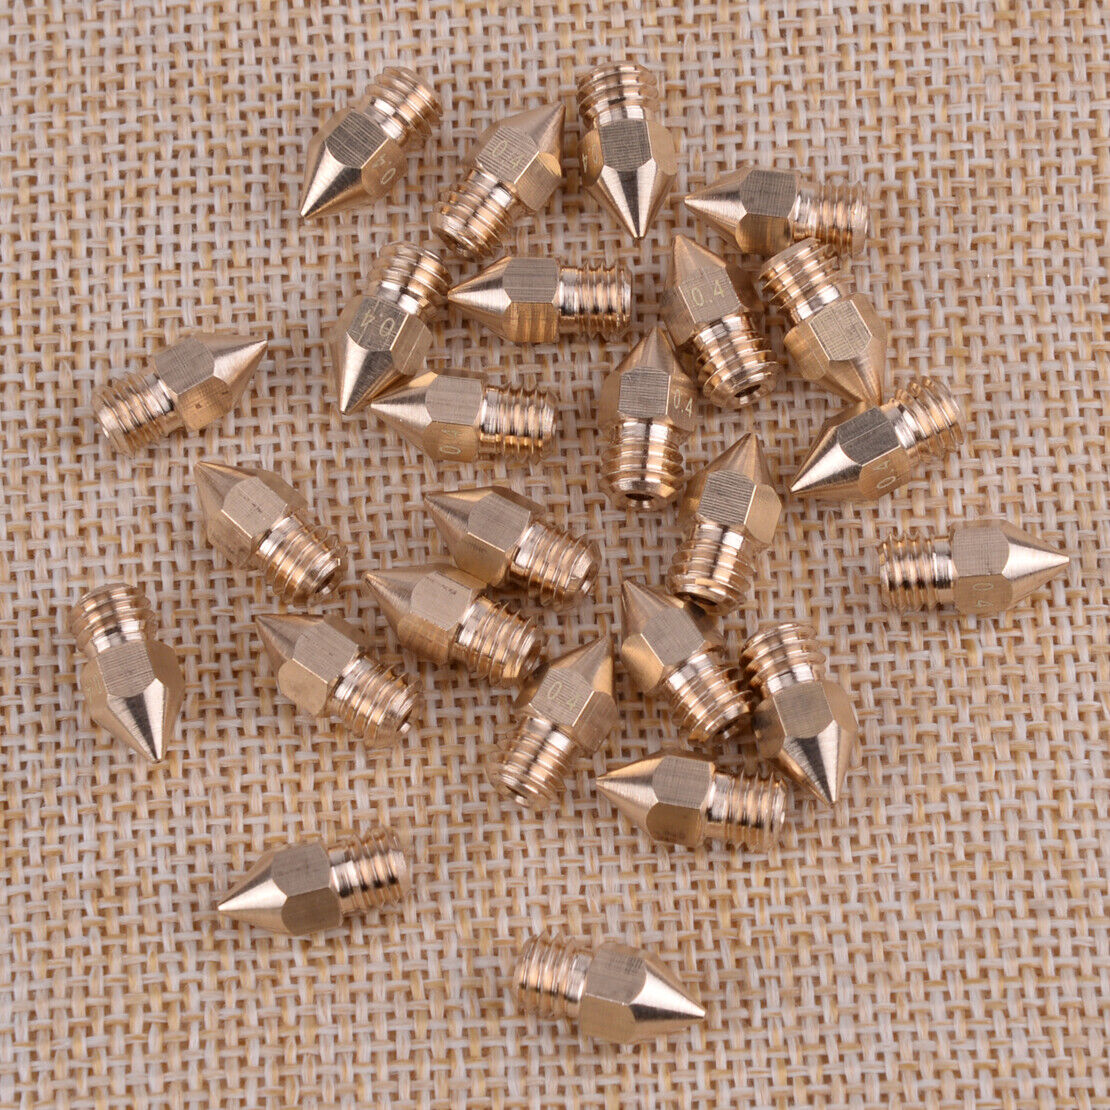 25pcs/pack 0.4mm Extruder 3D Printer Brass Nozzle fit for Creality CR-10 MK8